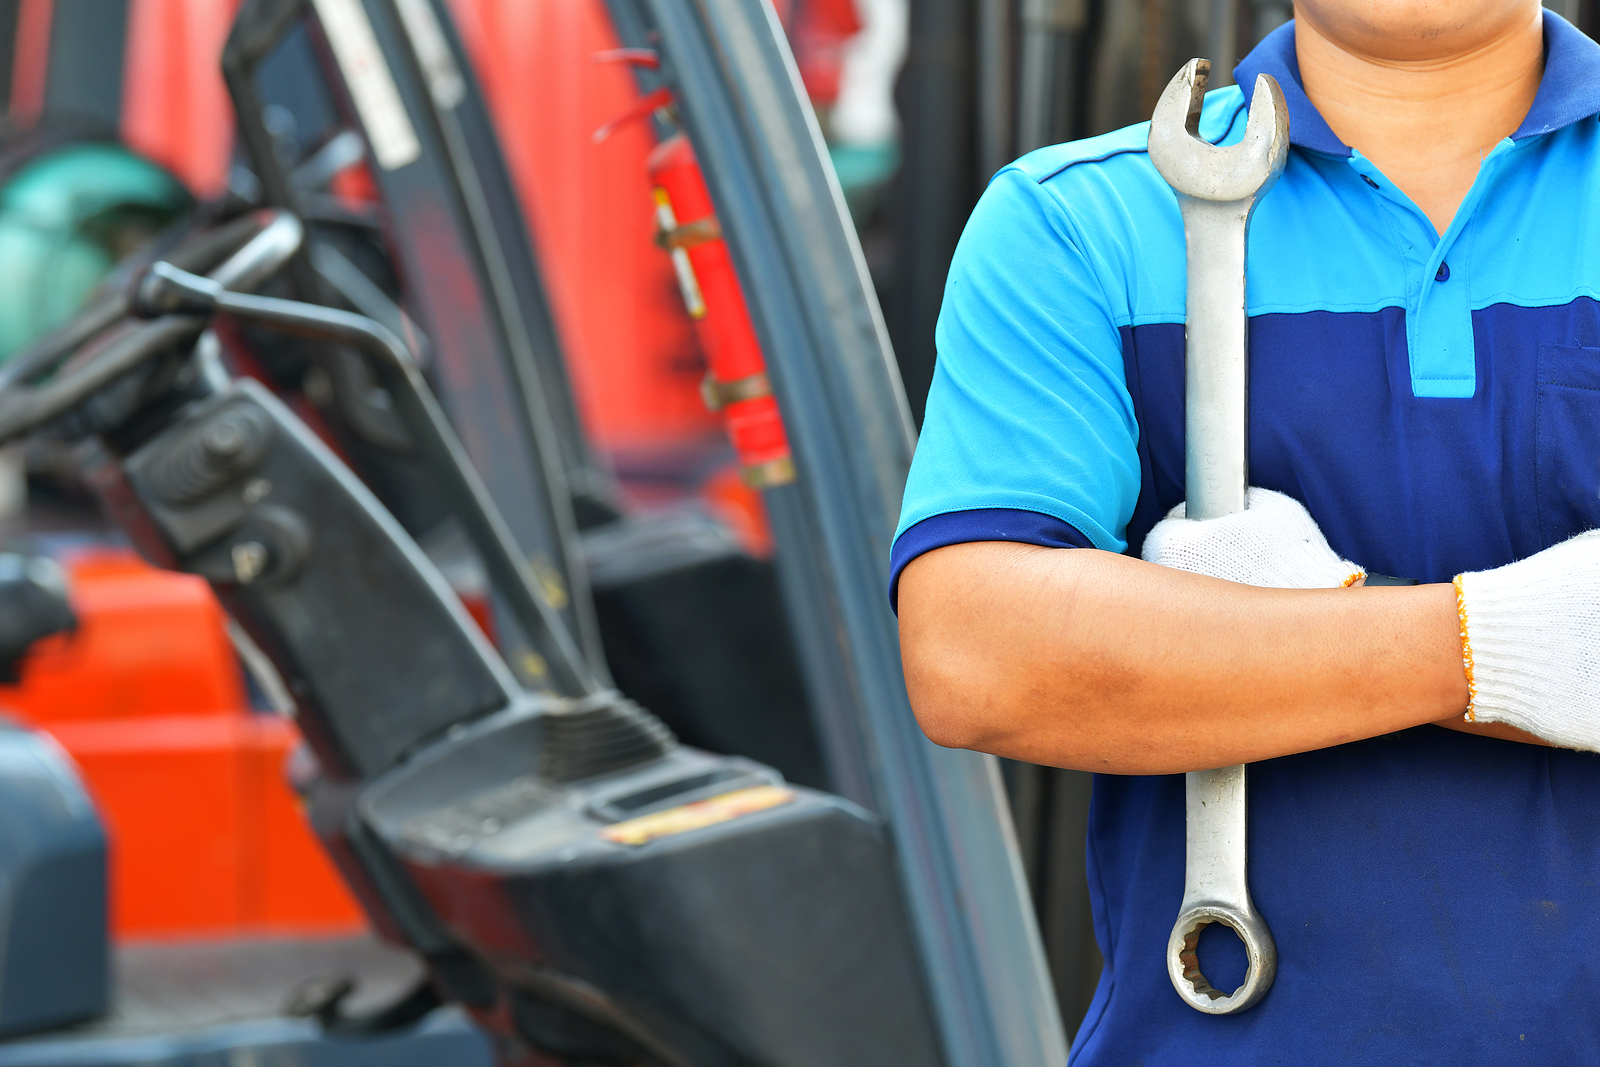 LOLER & PUWER – how to ensure your forklift thorough examination regime meets both sets of regulations